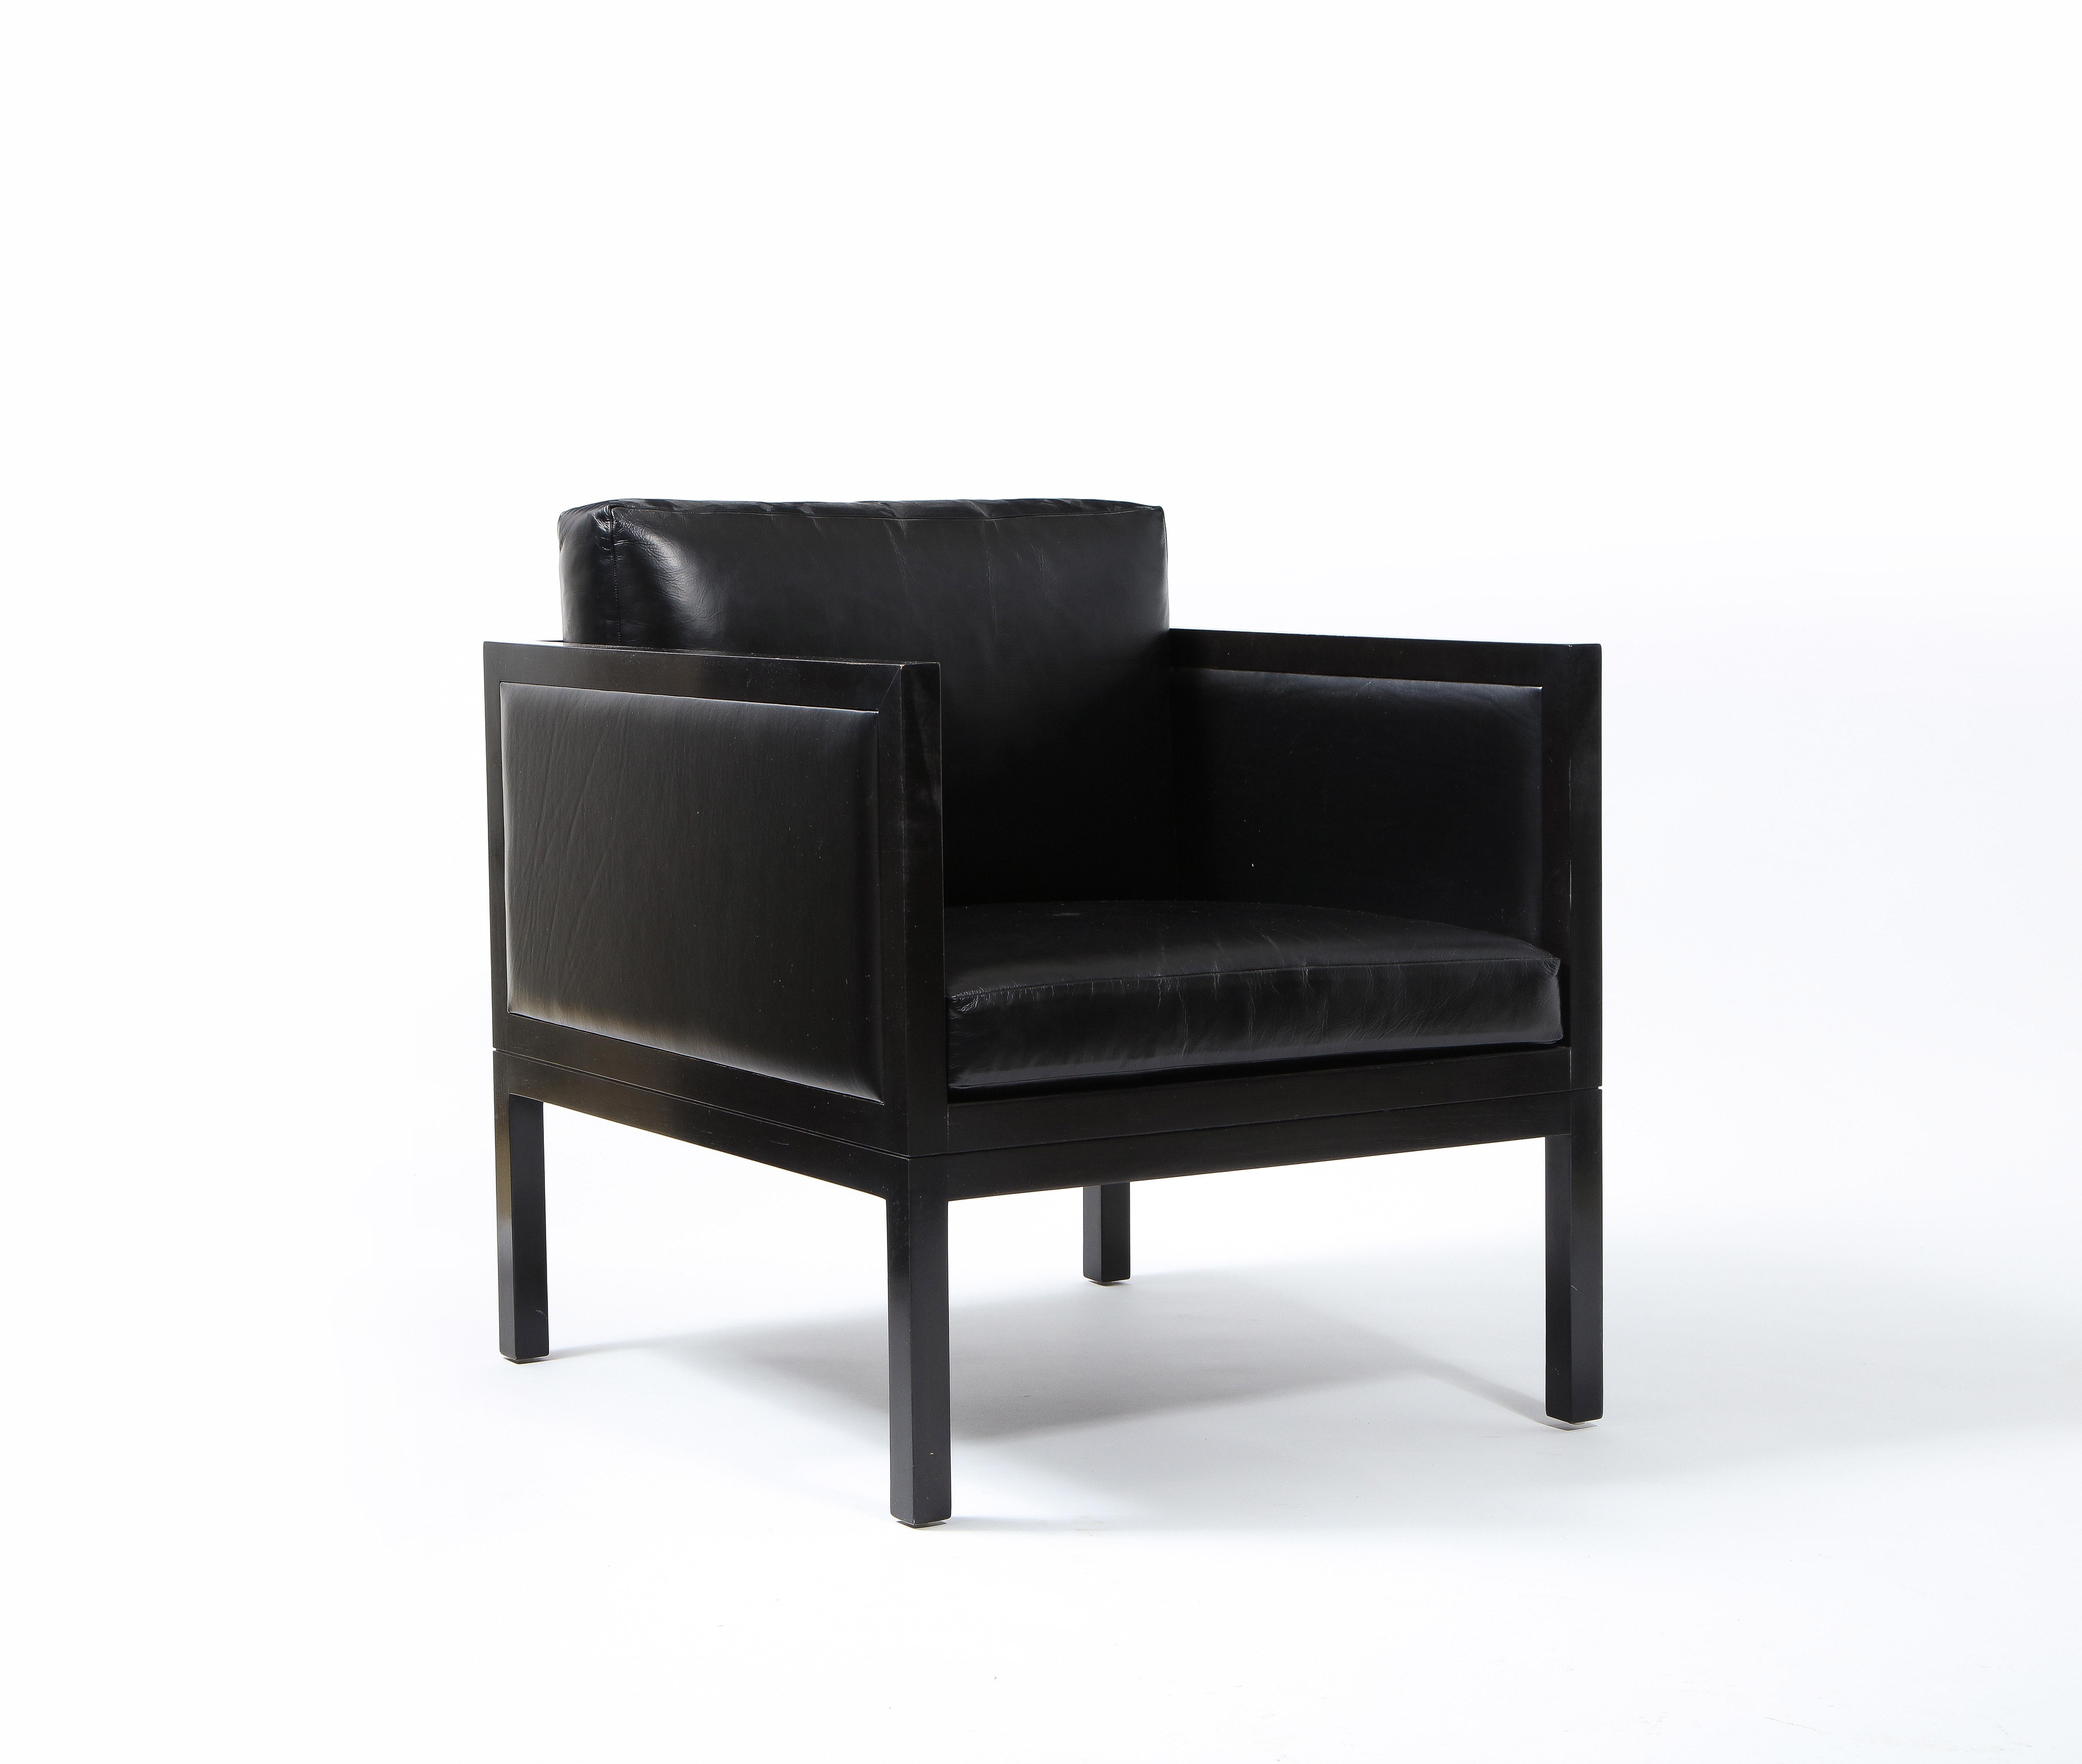 MEIER/FERRER Modernist Leather, Wood and Metal Club Chair, USA 2010 2